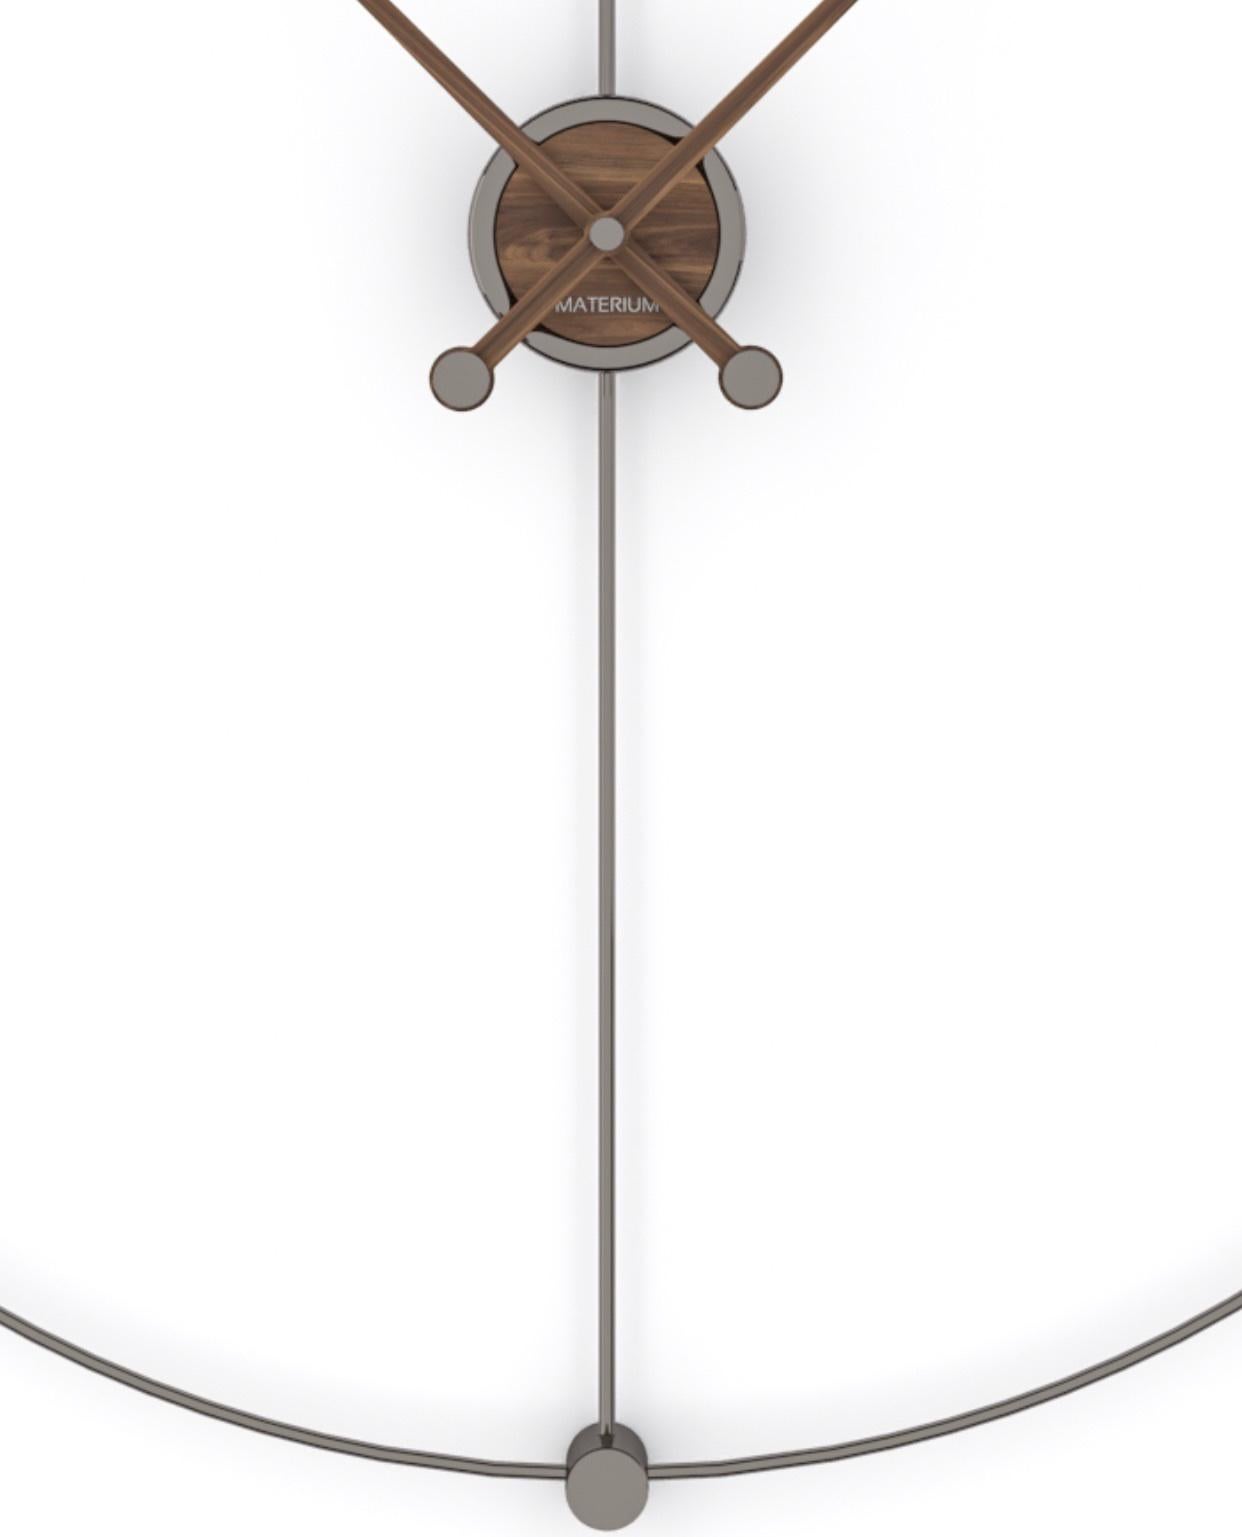 Euclideo Wall Clock, Modern, Italy, 2019 In New Condition For Sale In Los Angeles, CA